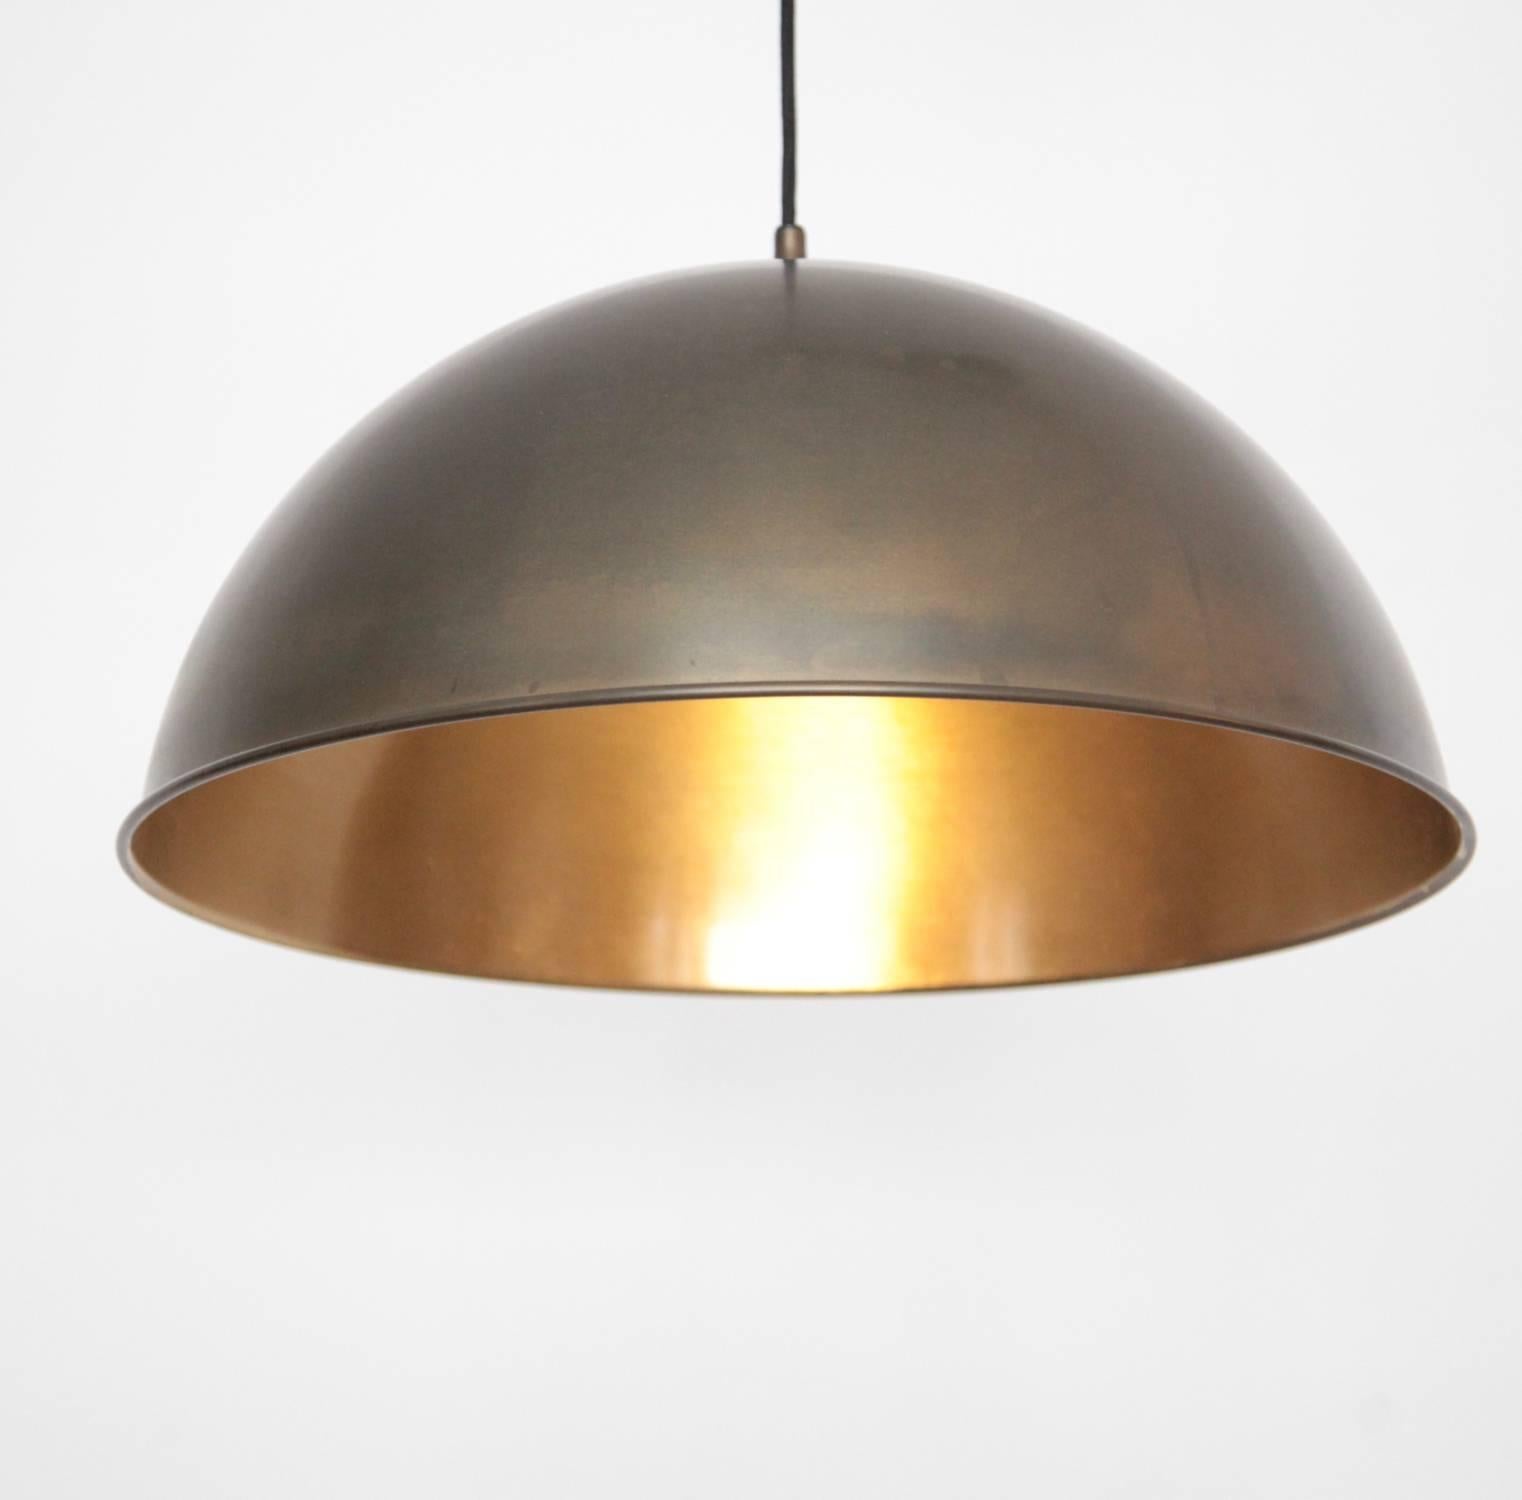 Late 20th Century Huge Florian Schulz Posa Counterweight Pendant Lamp with a Great Flat Patina